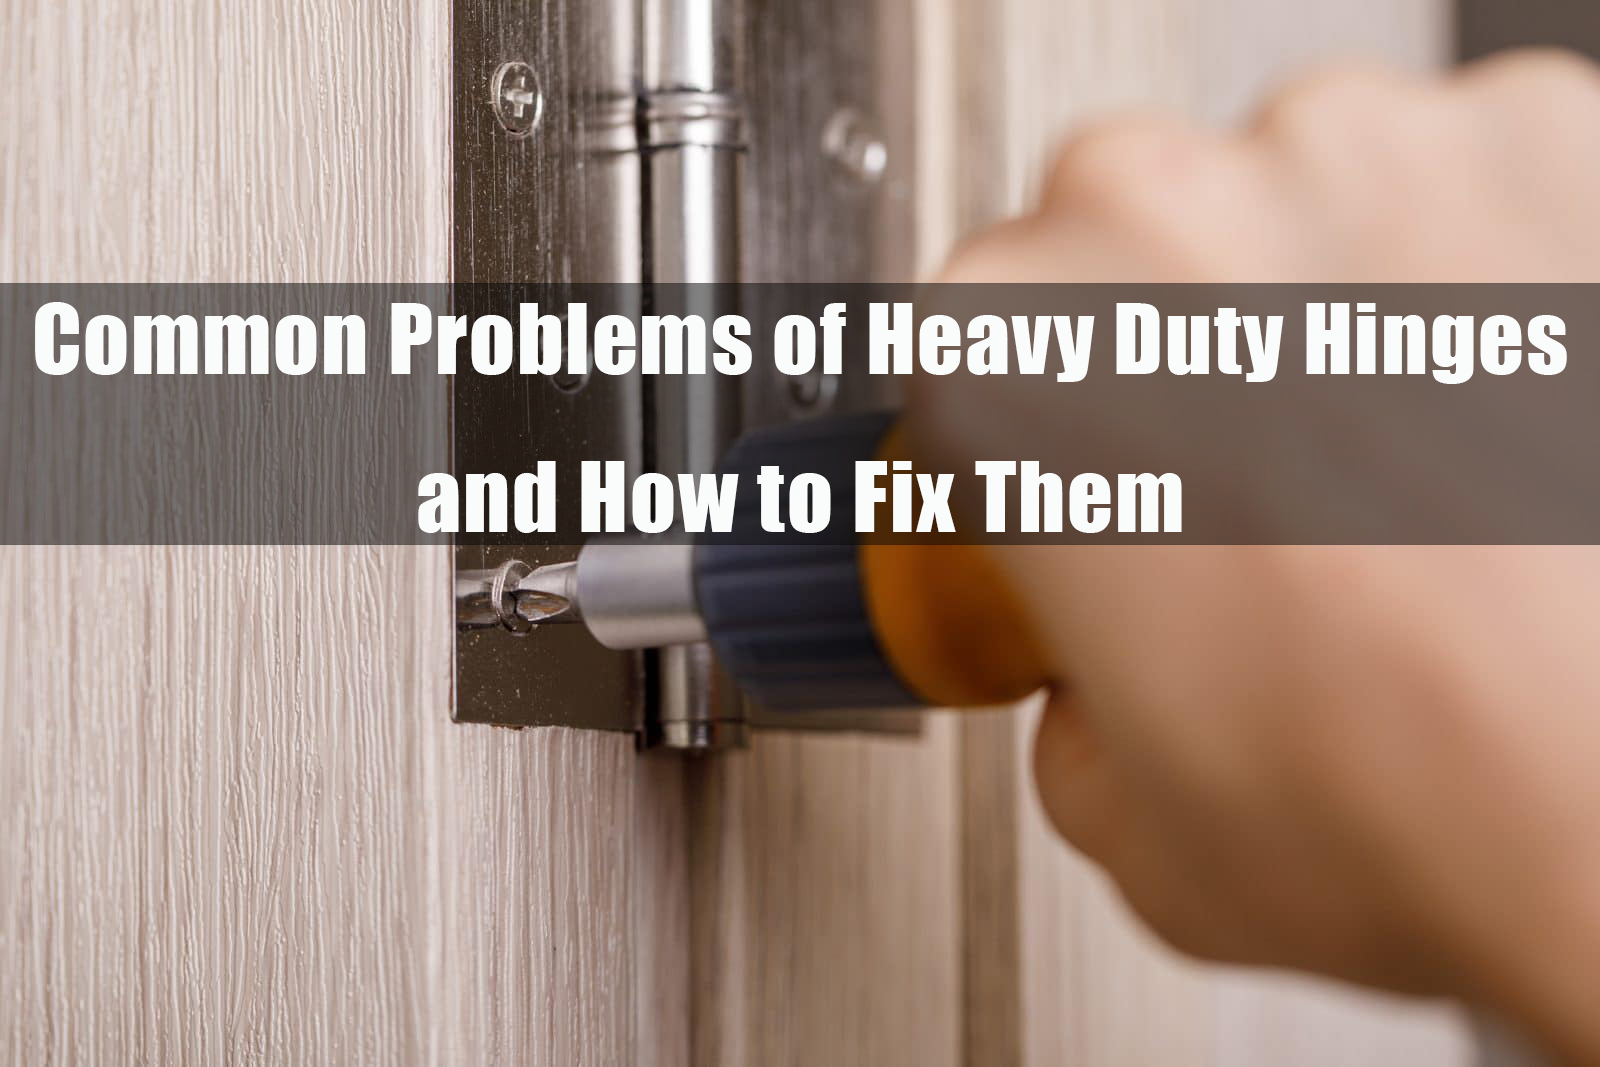 Common Problems of Heavy Duty Hinges and How to Fix Them: Part 1